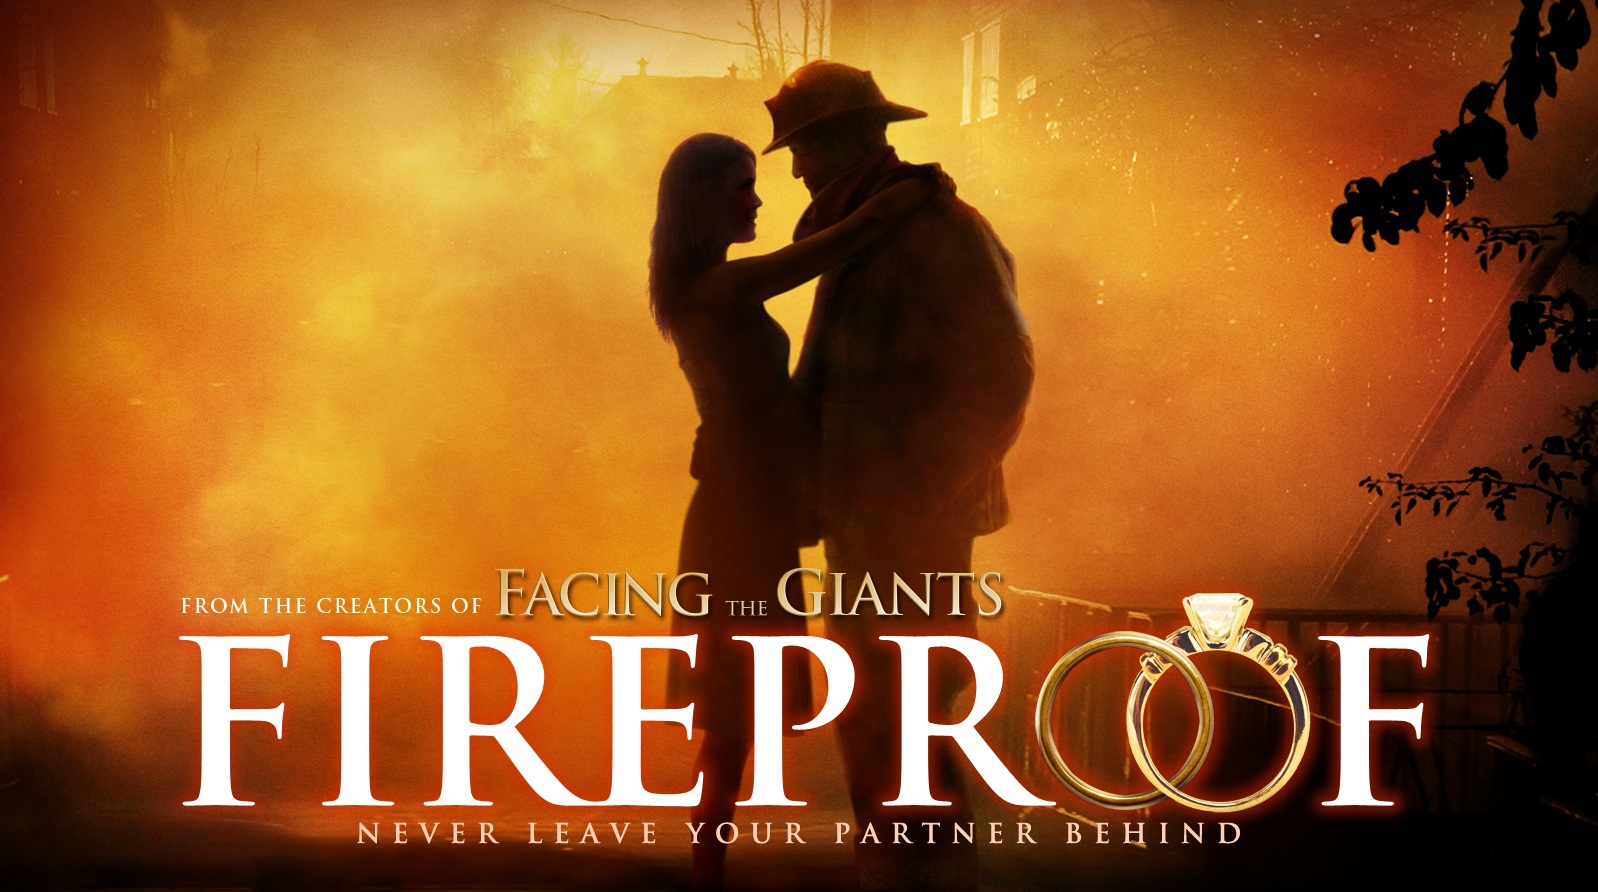 fireproof summary and movie review